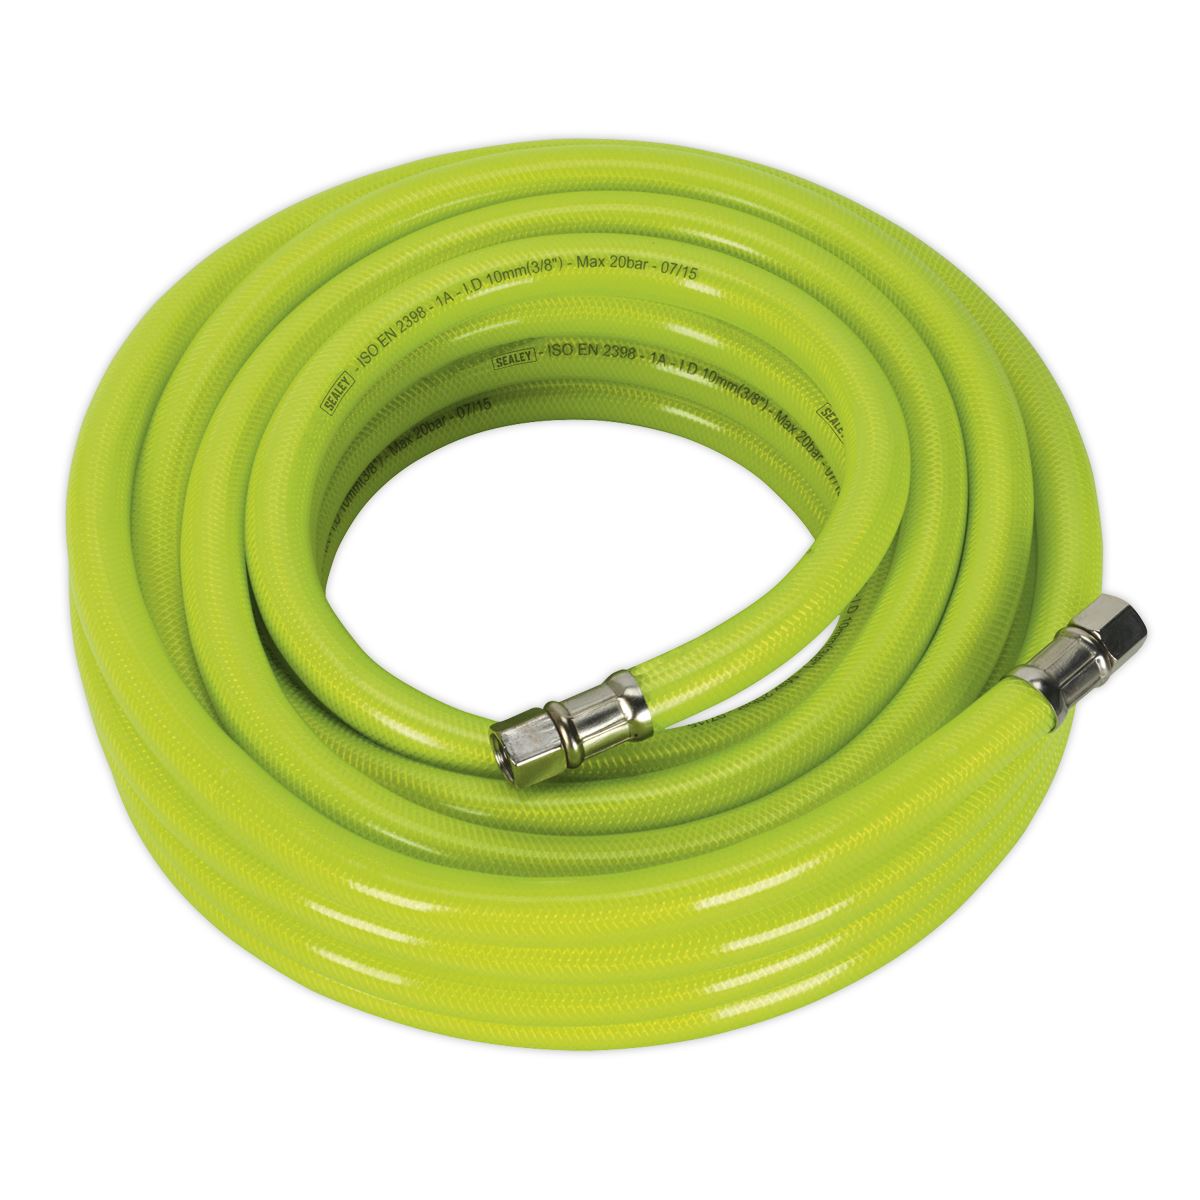 Sealey Air Hose High-Visibility 10m x Ø10mm with 1/4"BSP Unions